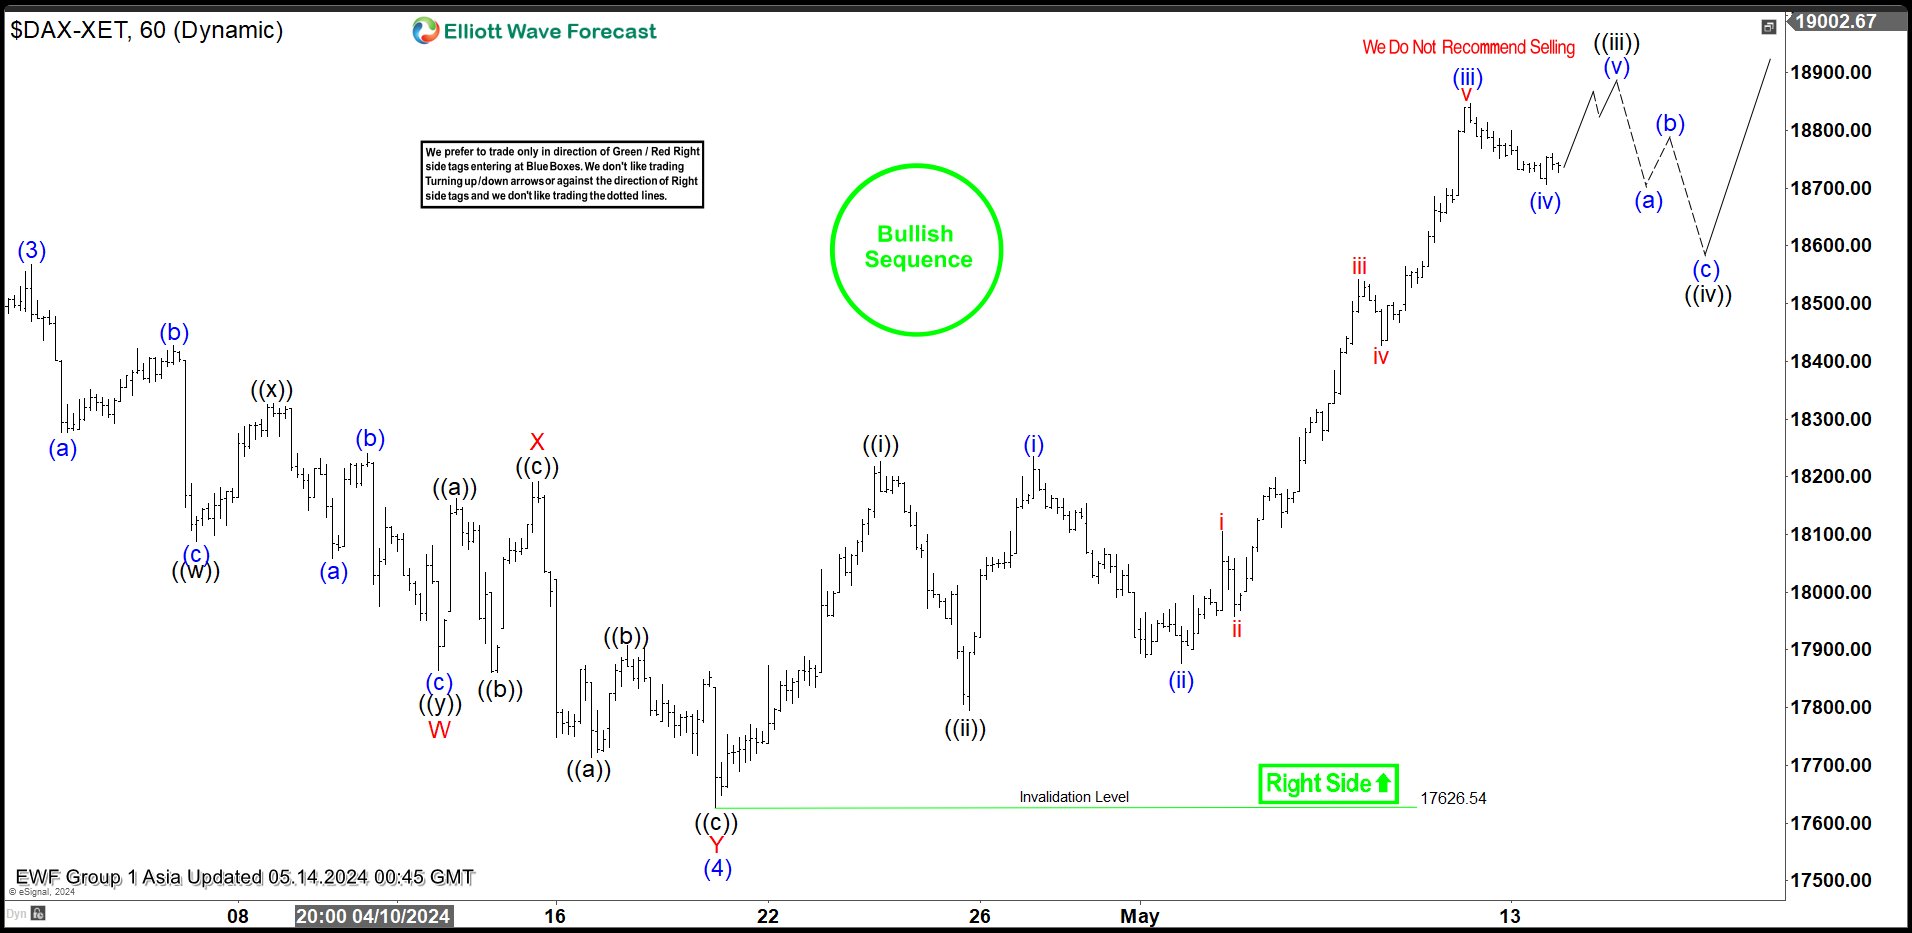 Elliott Wave Intraday on DAX Shows Incomplete Bullish Sequence